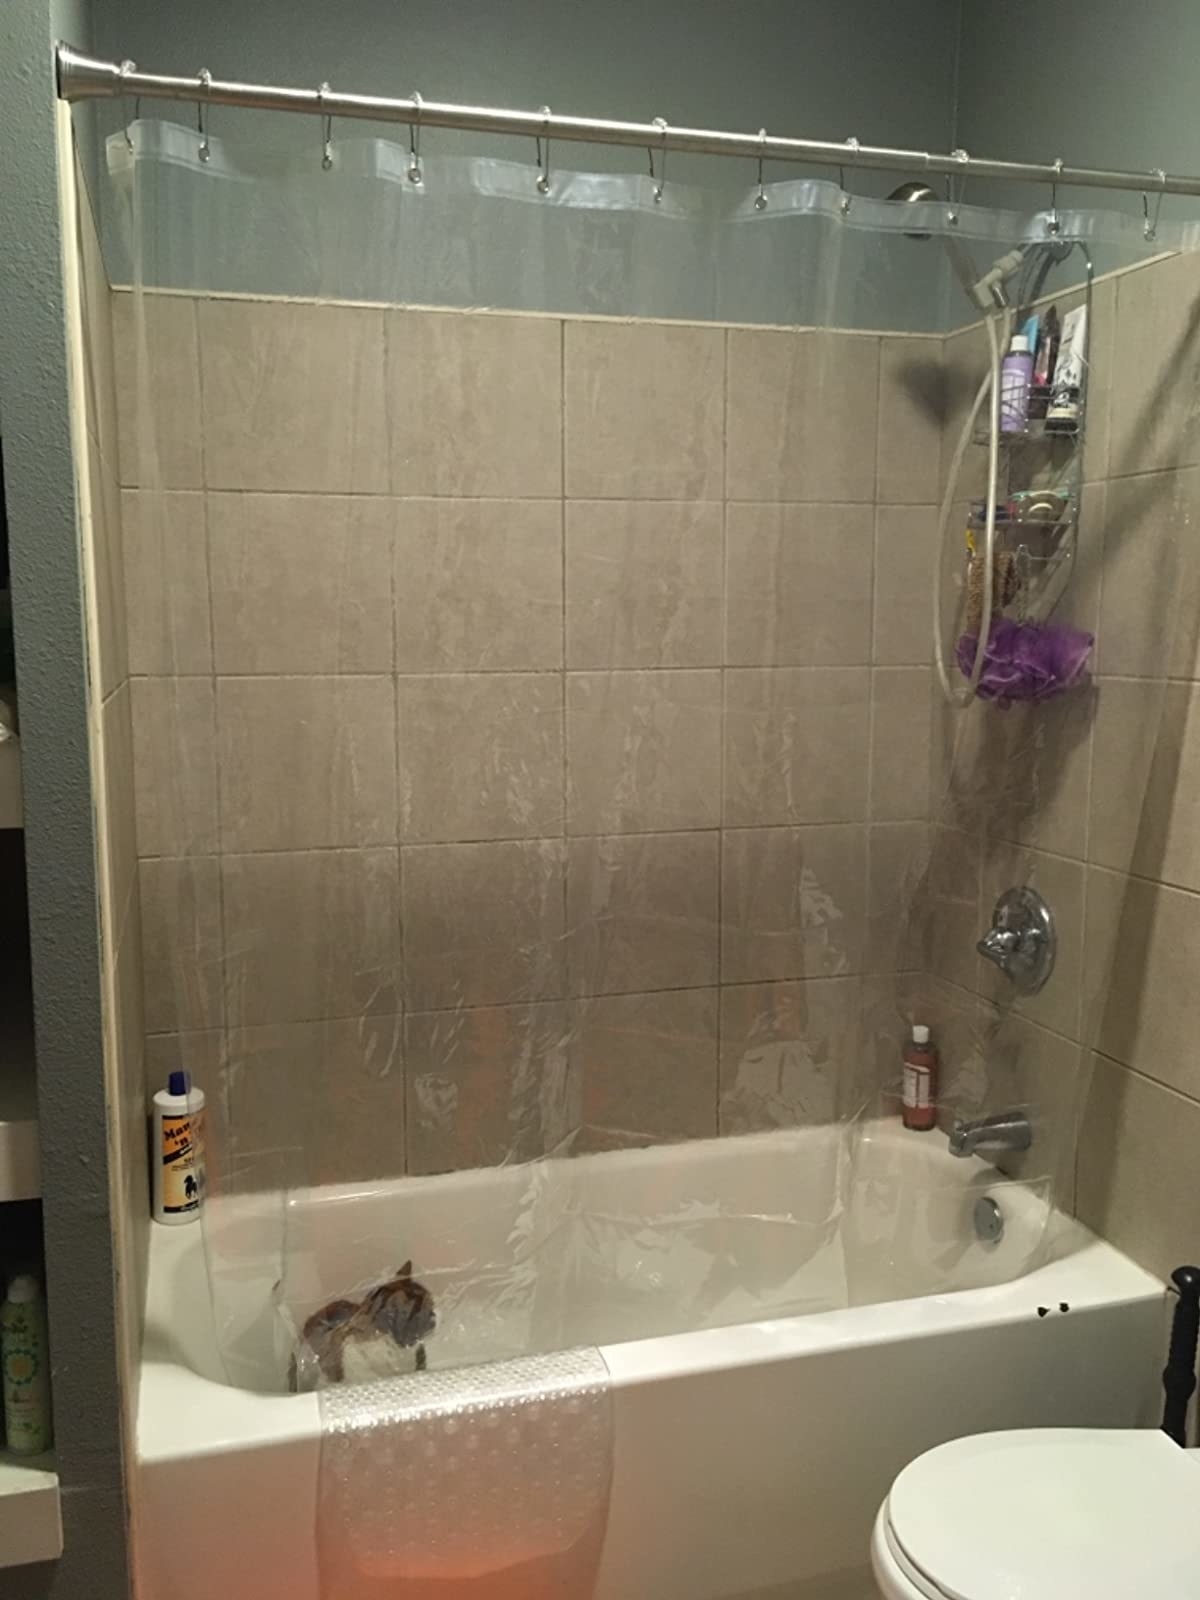 reviewer image of a cat inside a tub that has a clear AmazerBath Plastic Shower Curtain hanging from it